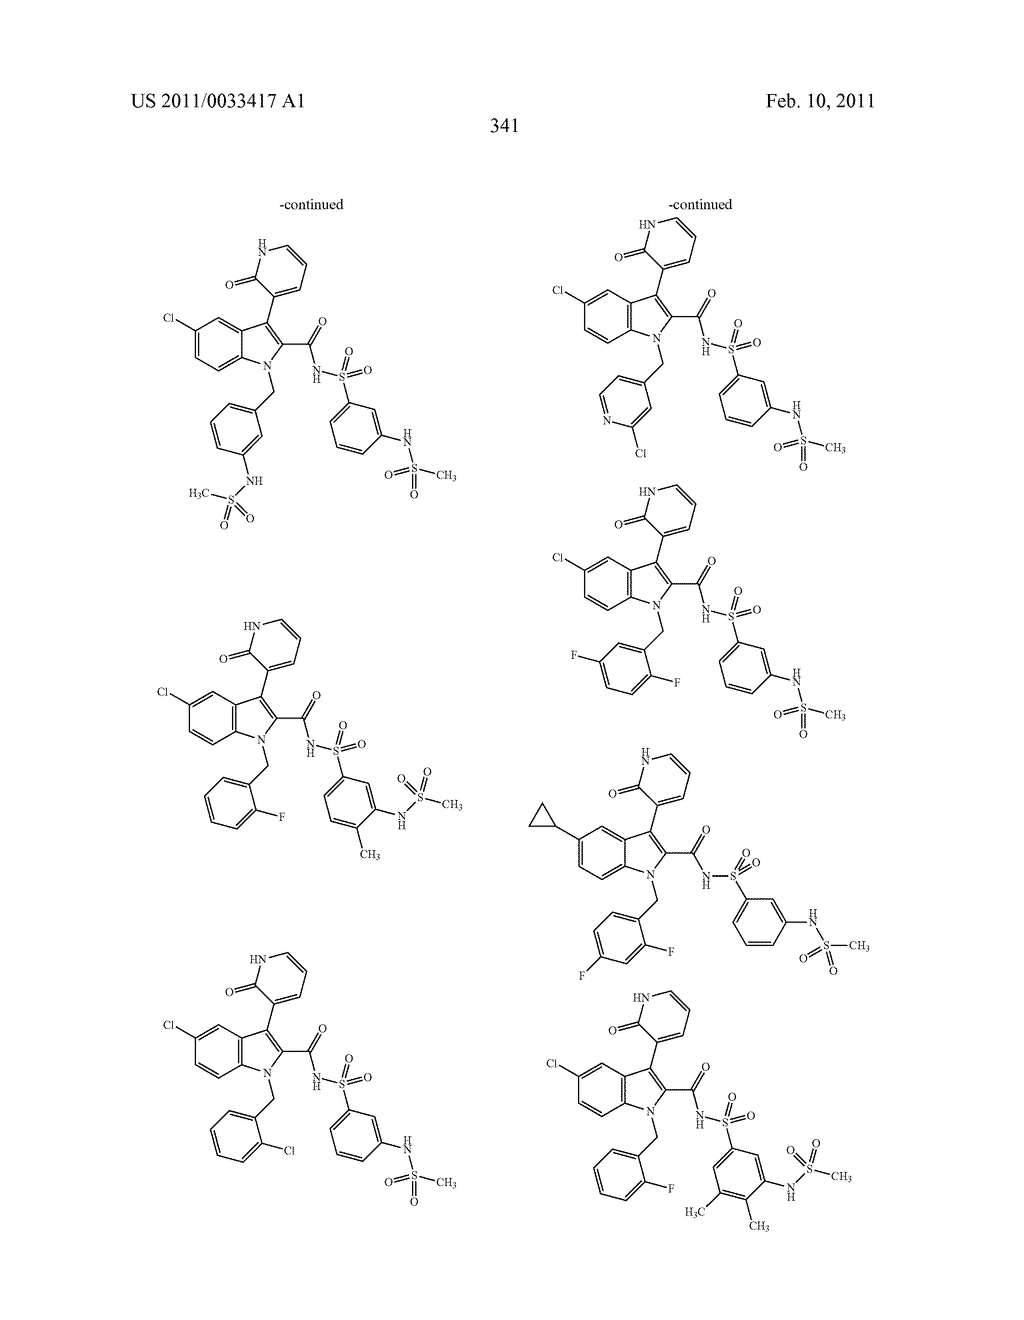 2,3-SUBSTITUTED INDOLE DERIVATIVES FOR TREATING VIRAL INFECTIONS - diagram, schematic, and image 342